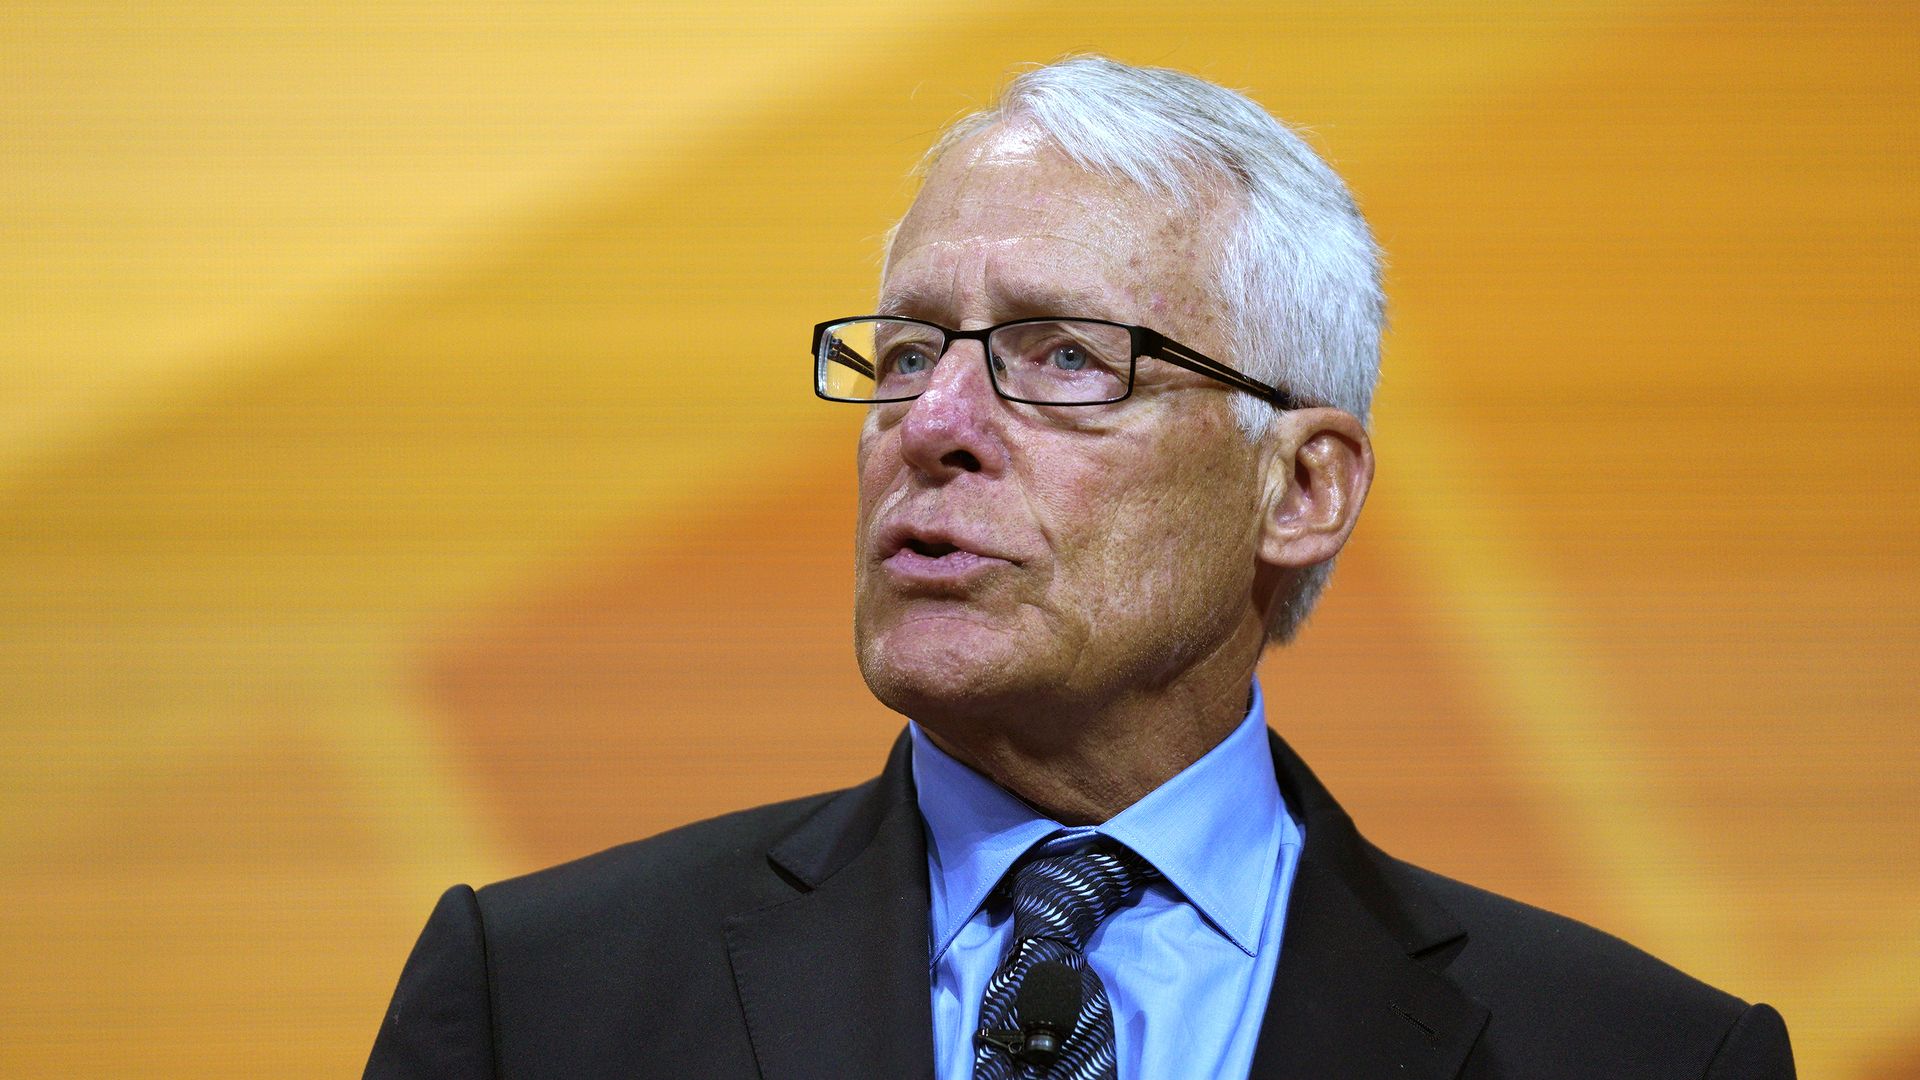 Rob Walton is the lead buyer of the Denver Broncos. Photo: Rick T. Wilking/Getty Images